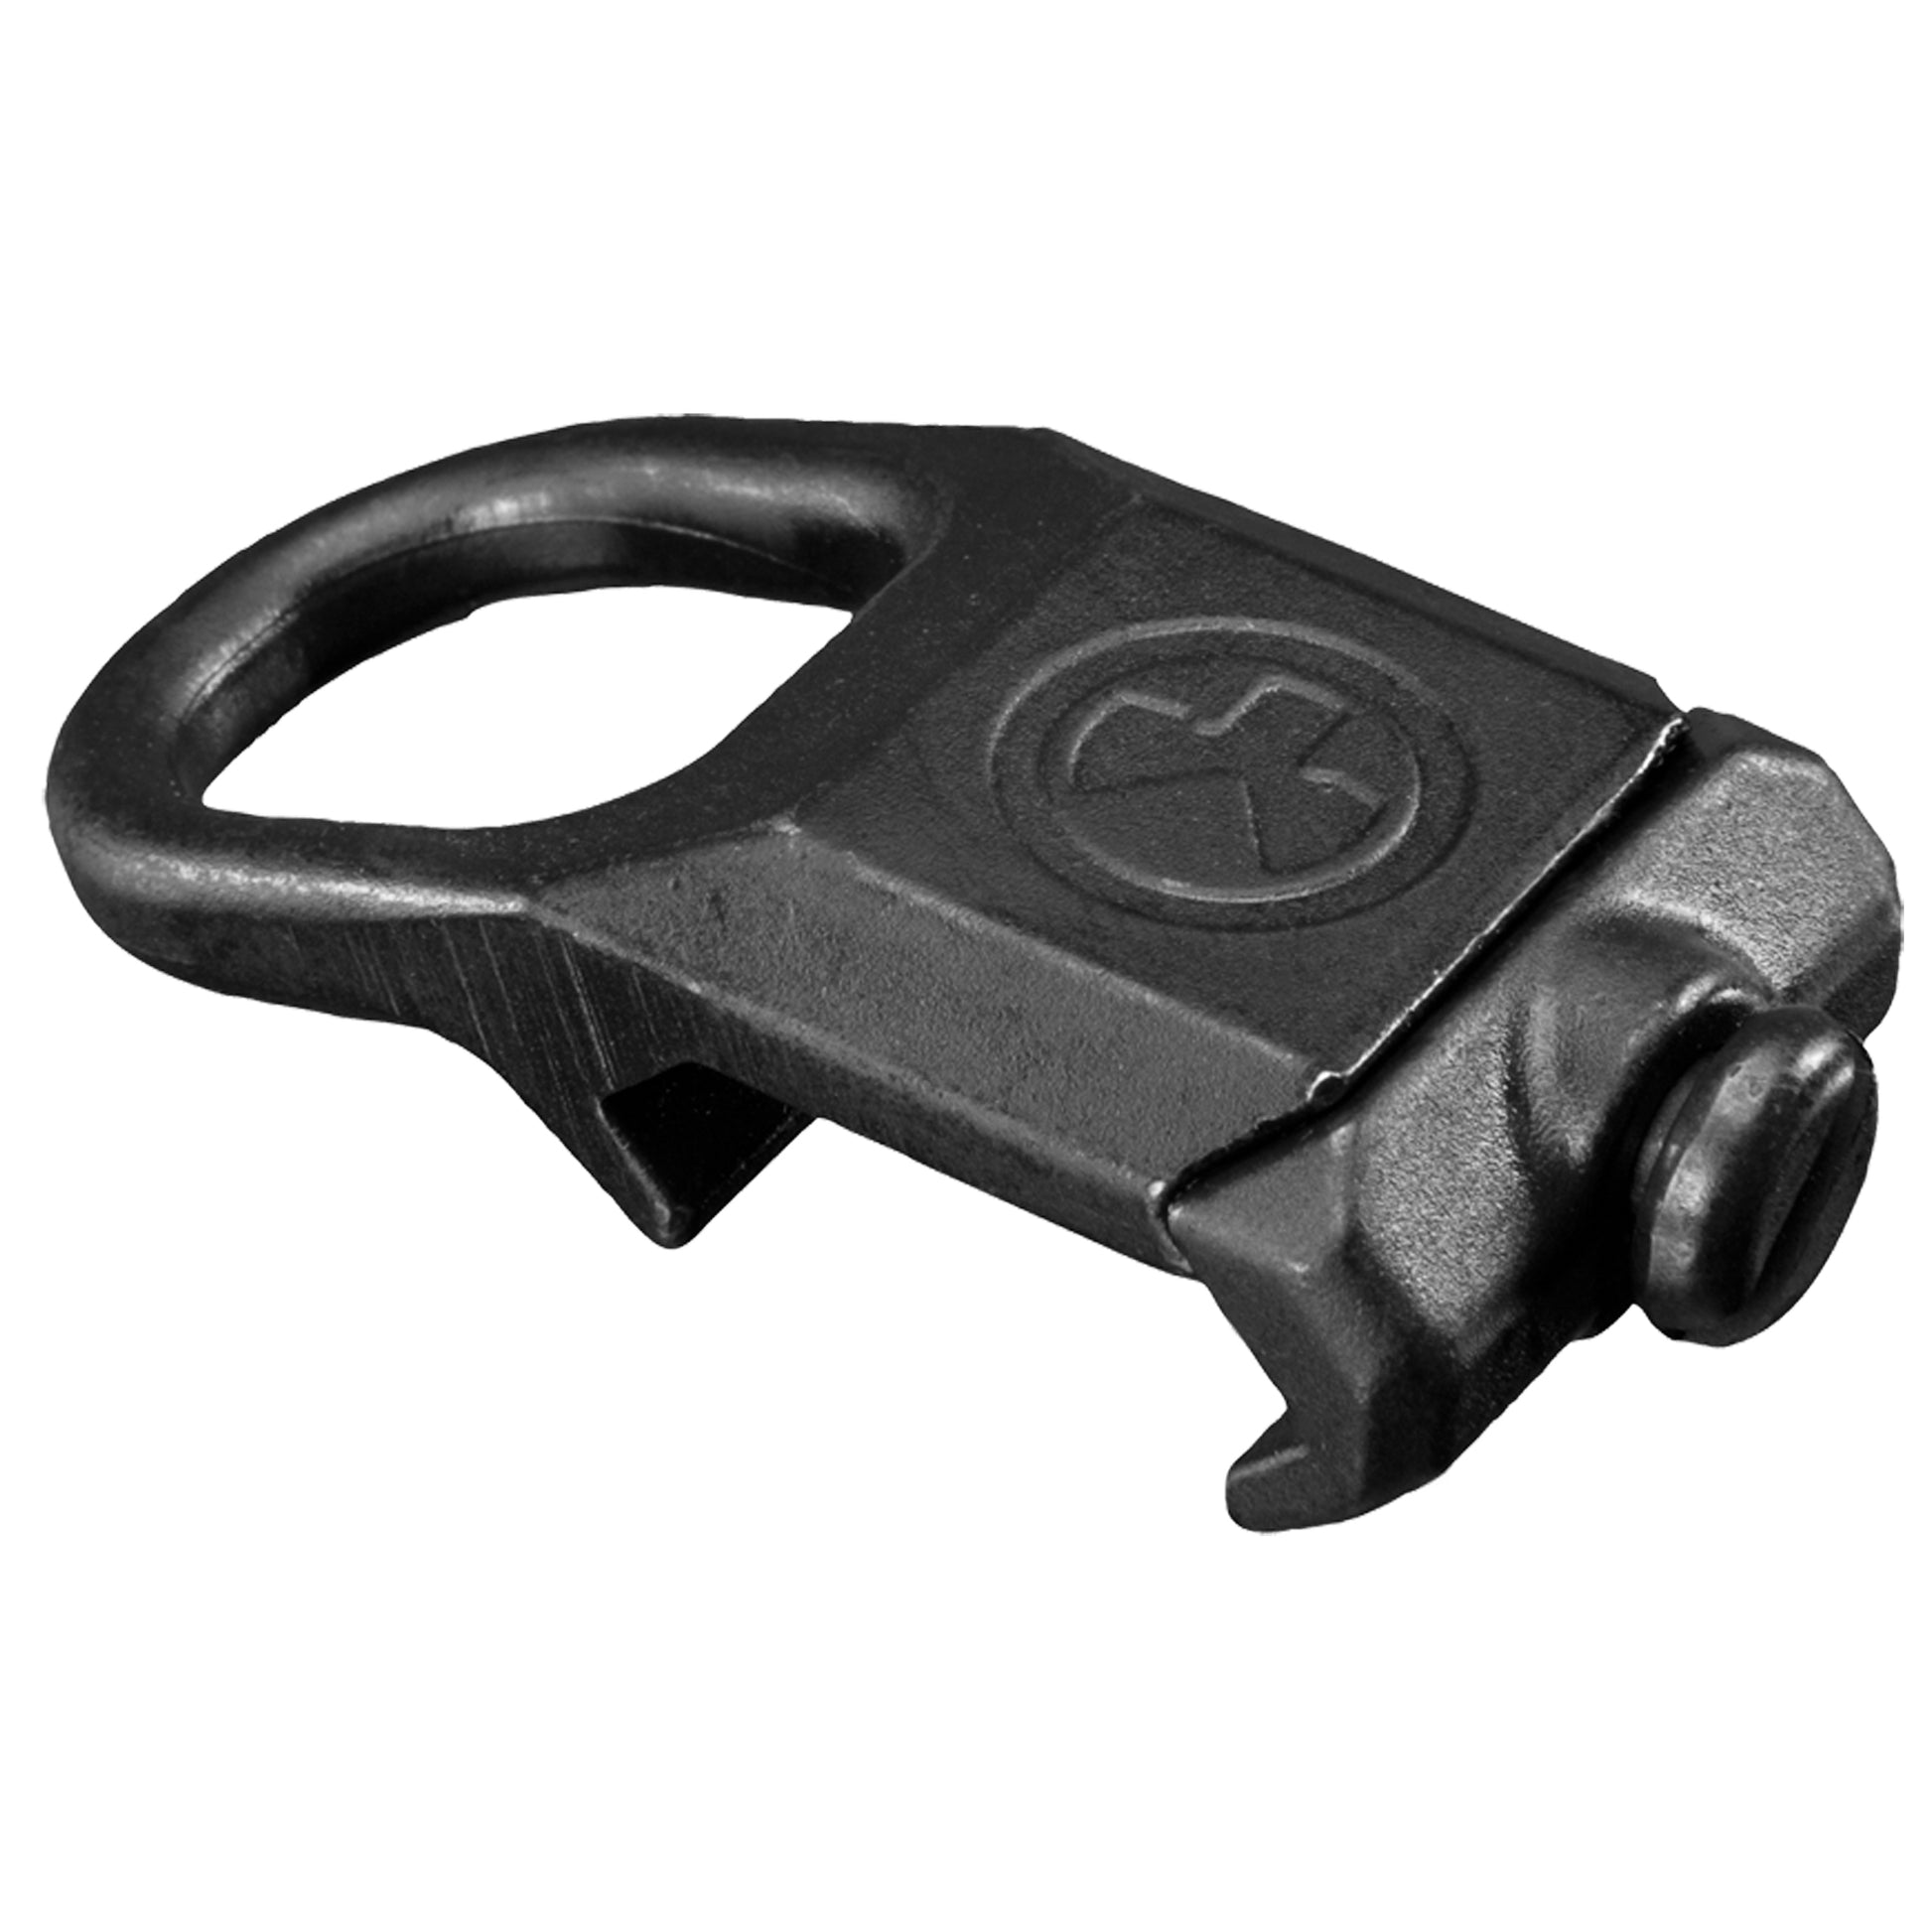 Magpul Industries Rail Sling Attachment Fits ASAP Sling Plate Black MAG502-BLK - California Shooting Supplies